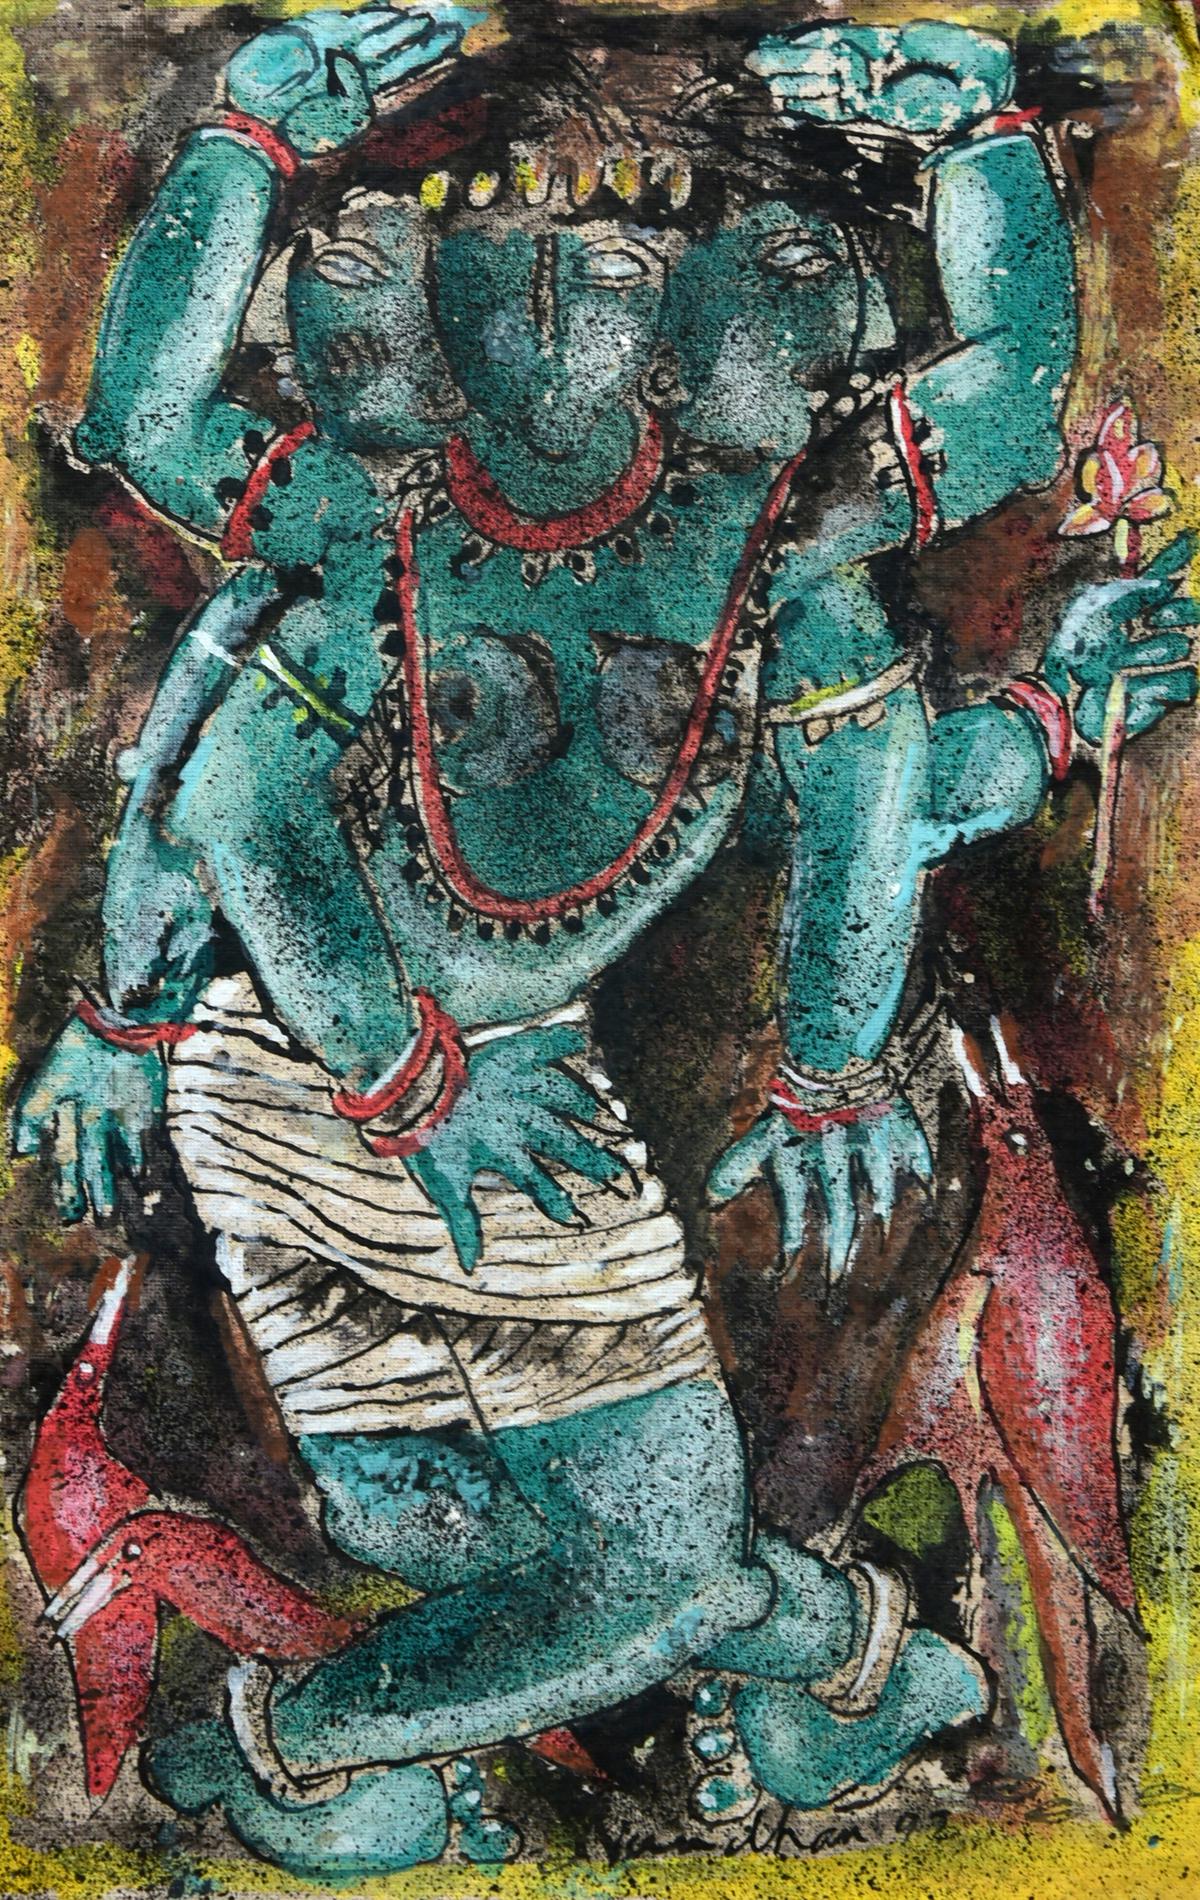 One of the early paintings of Nandan